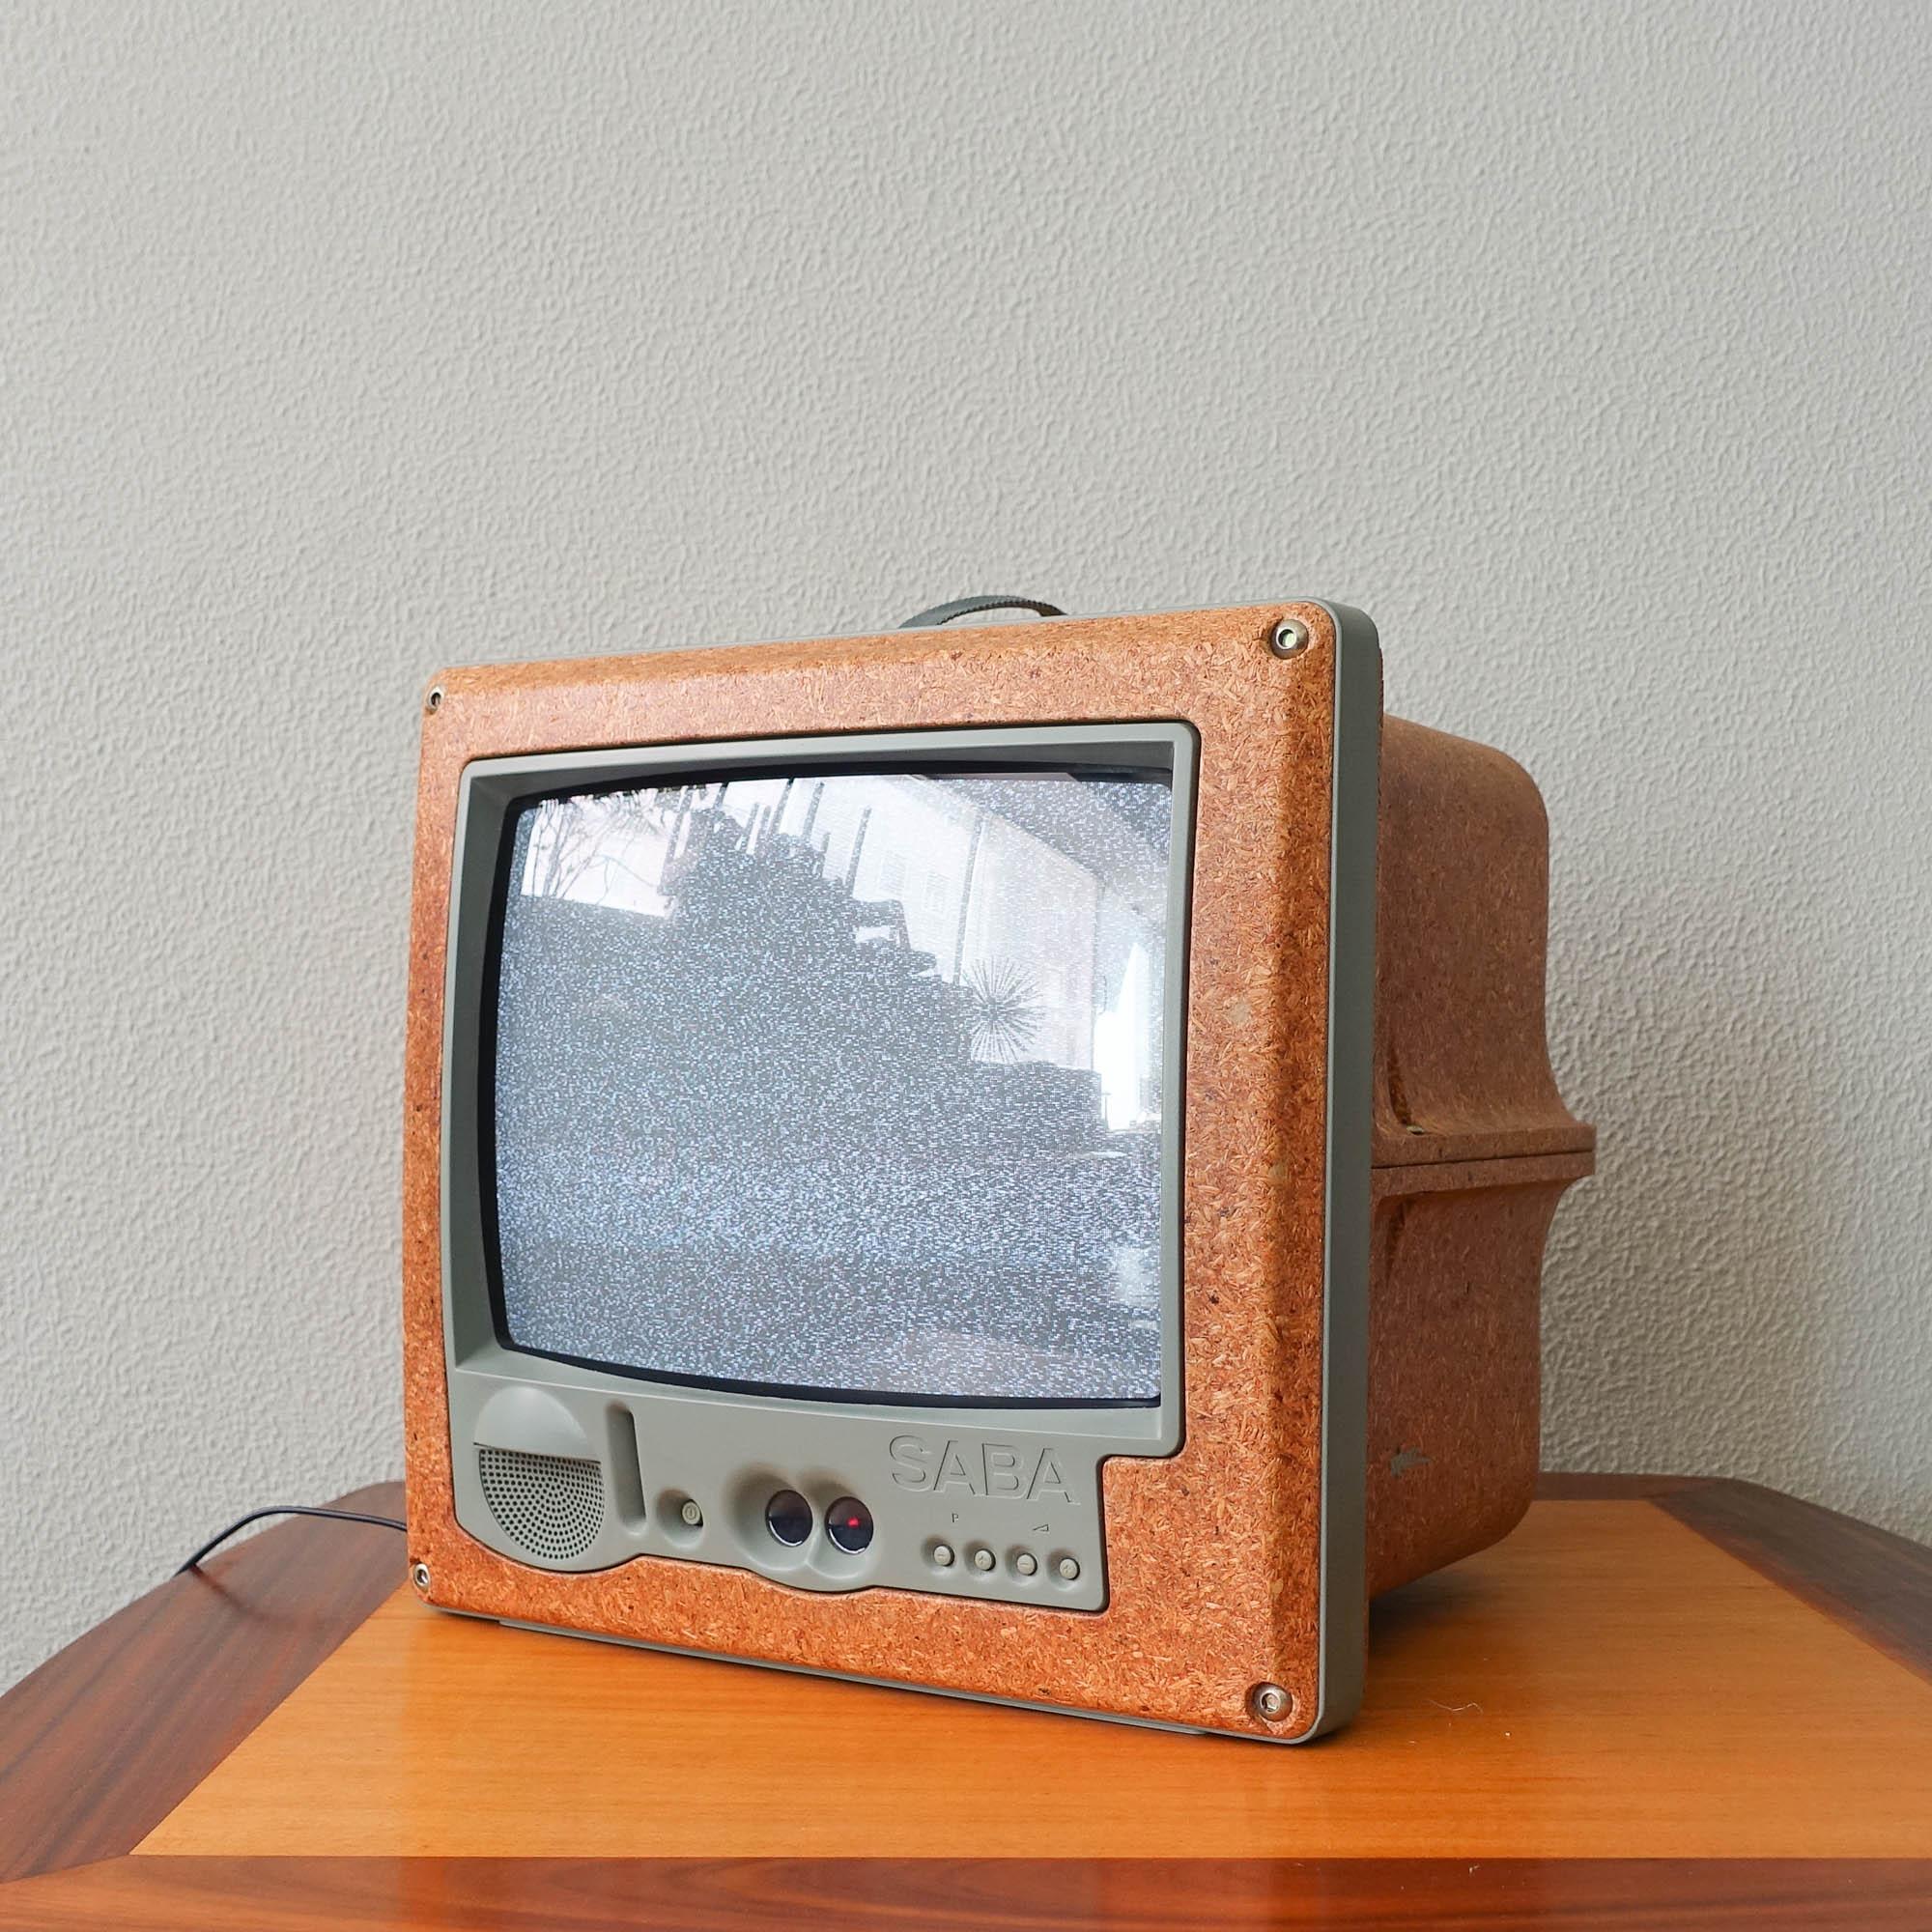 This portable television 'Jim Nature' was designed by Philippe Starck for Saba in France, in 1994. 
At a time when black plastic was the predominant material for making casing for electrical goods, French industrial designer Philippe Starck opted